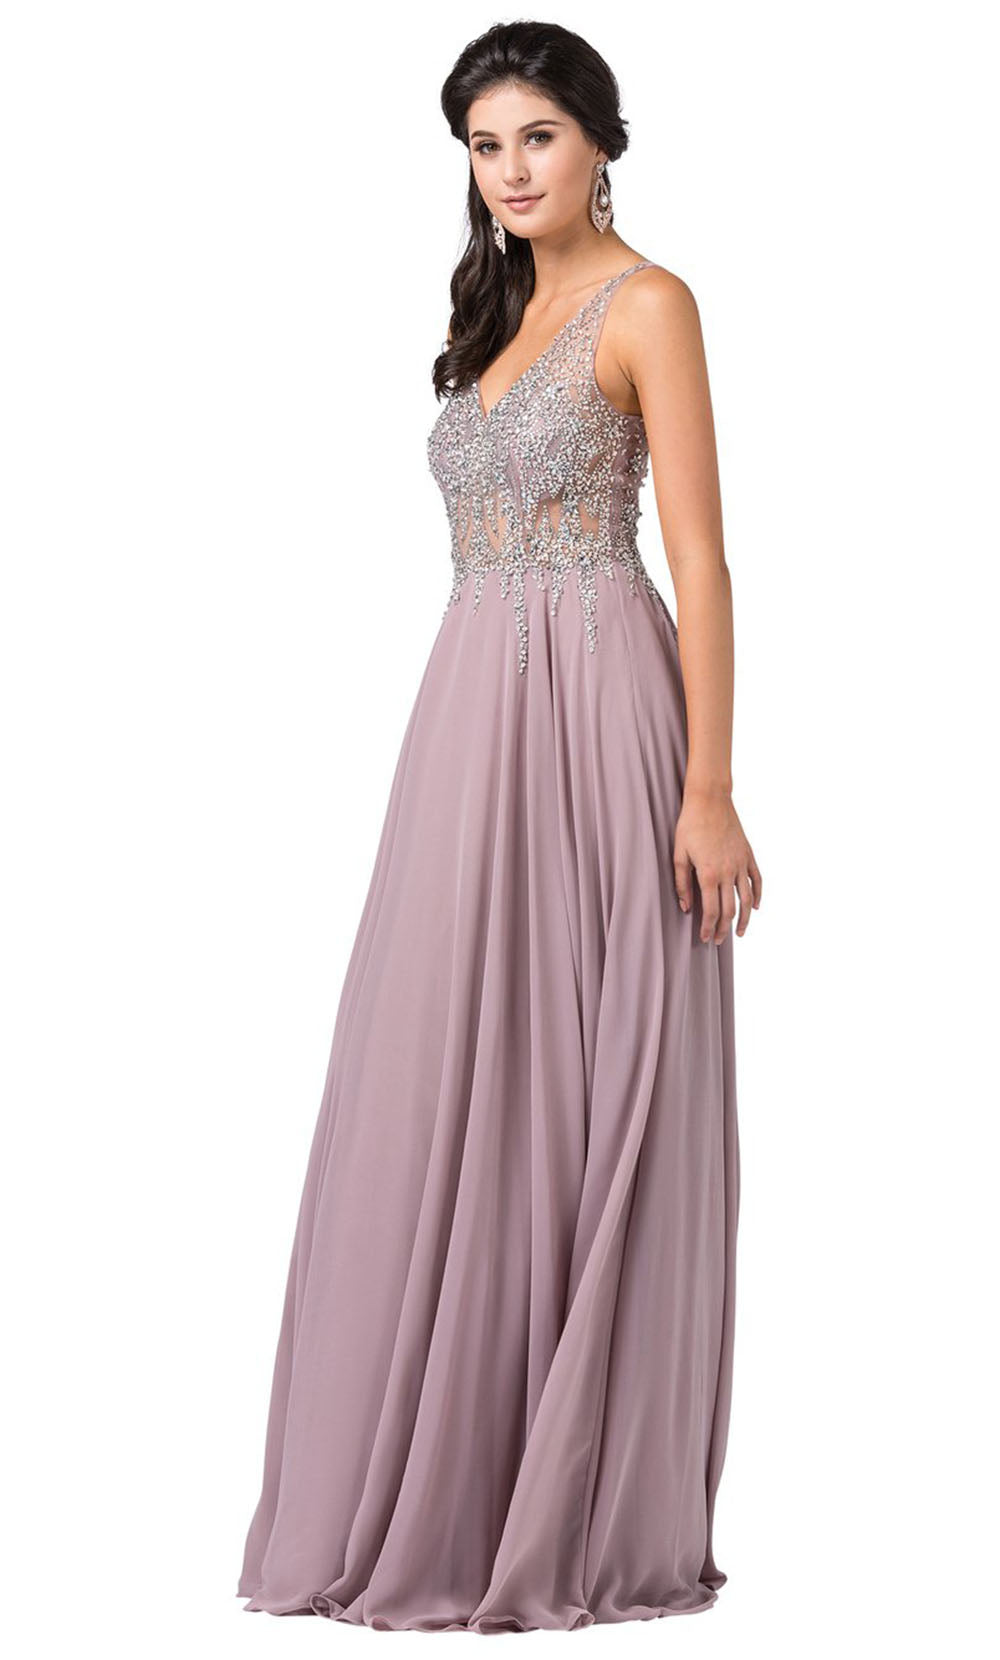 Dancing Queen - 2570 Embellished Sheer Bodice A-Line Gown In Brown